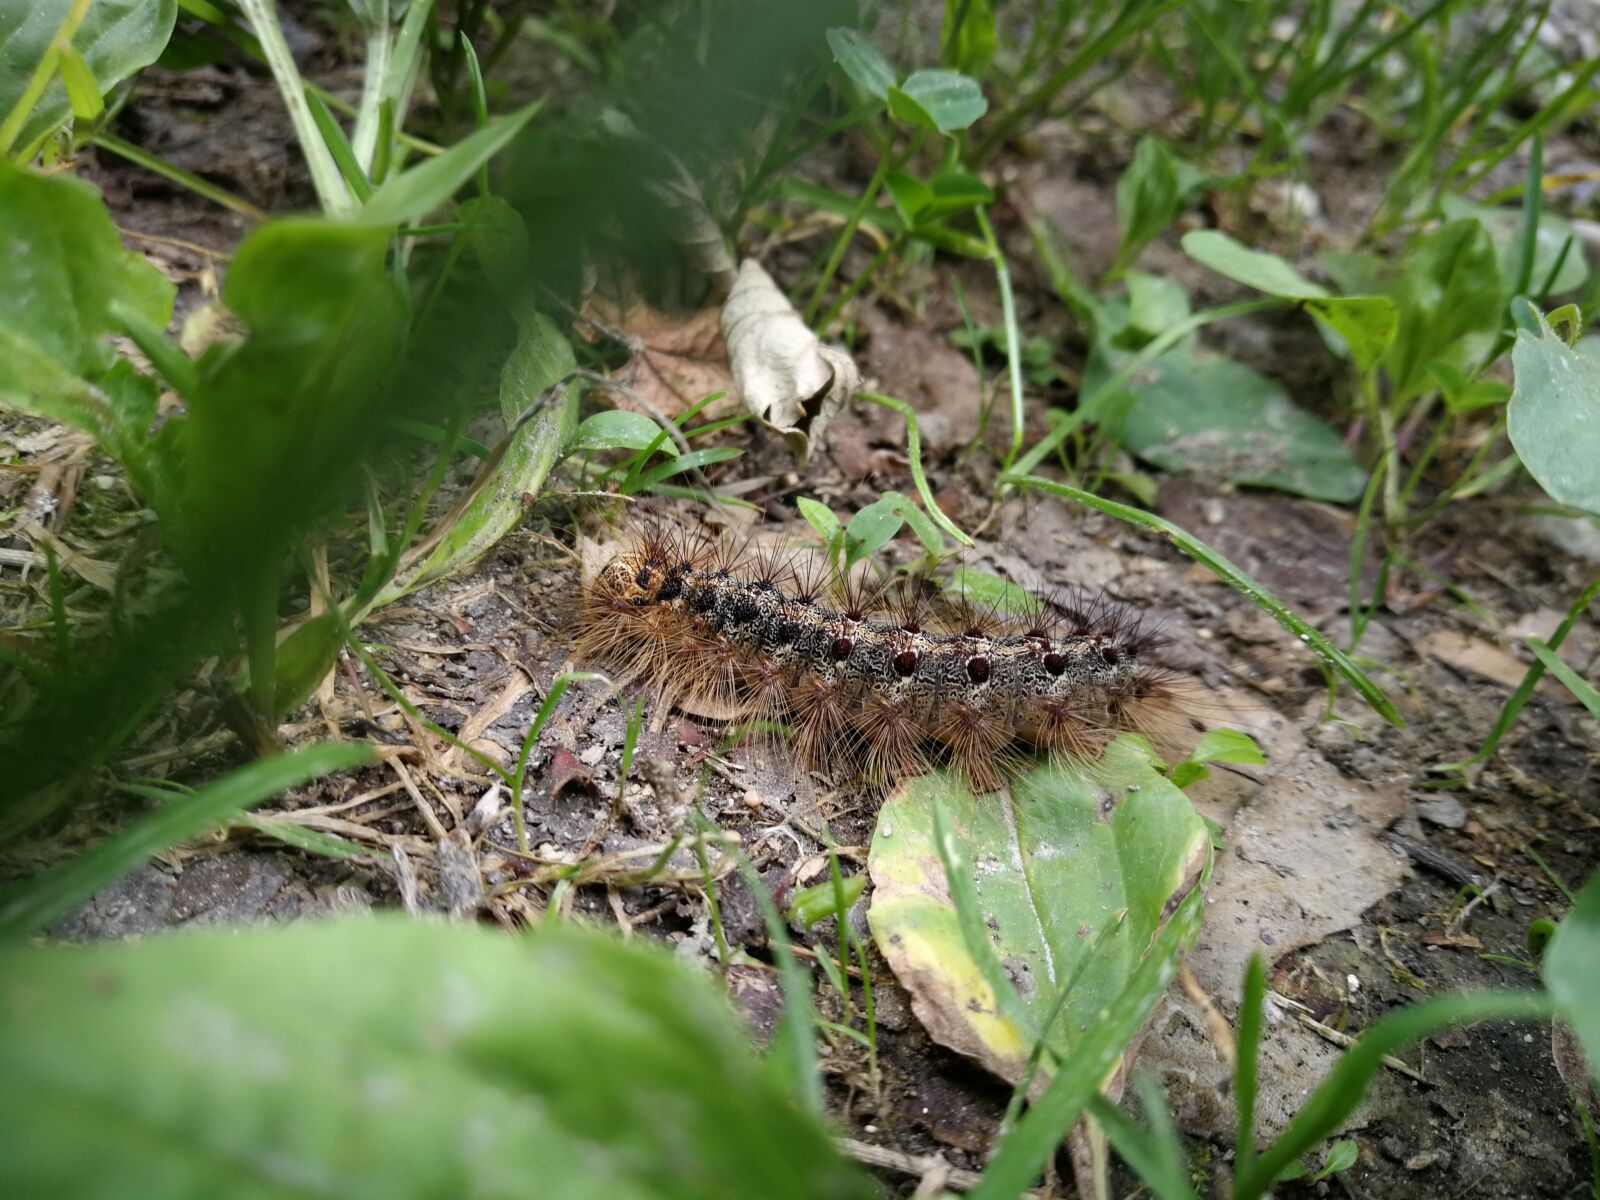 HUAWEI P10 Plus sample photo. Caterpillar, animal, insect photography